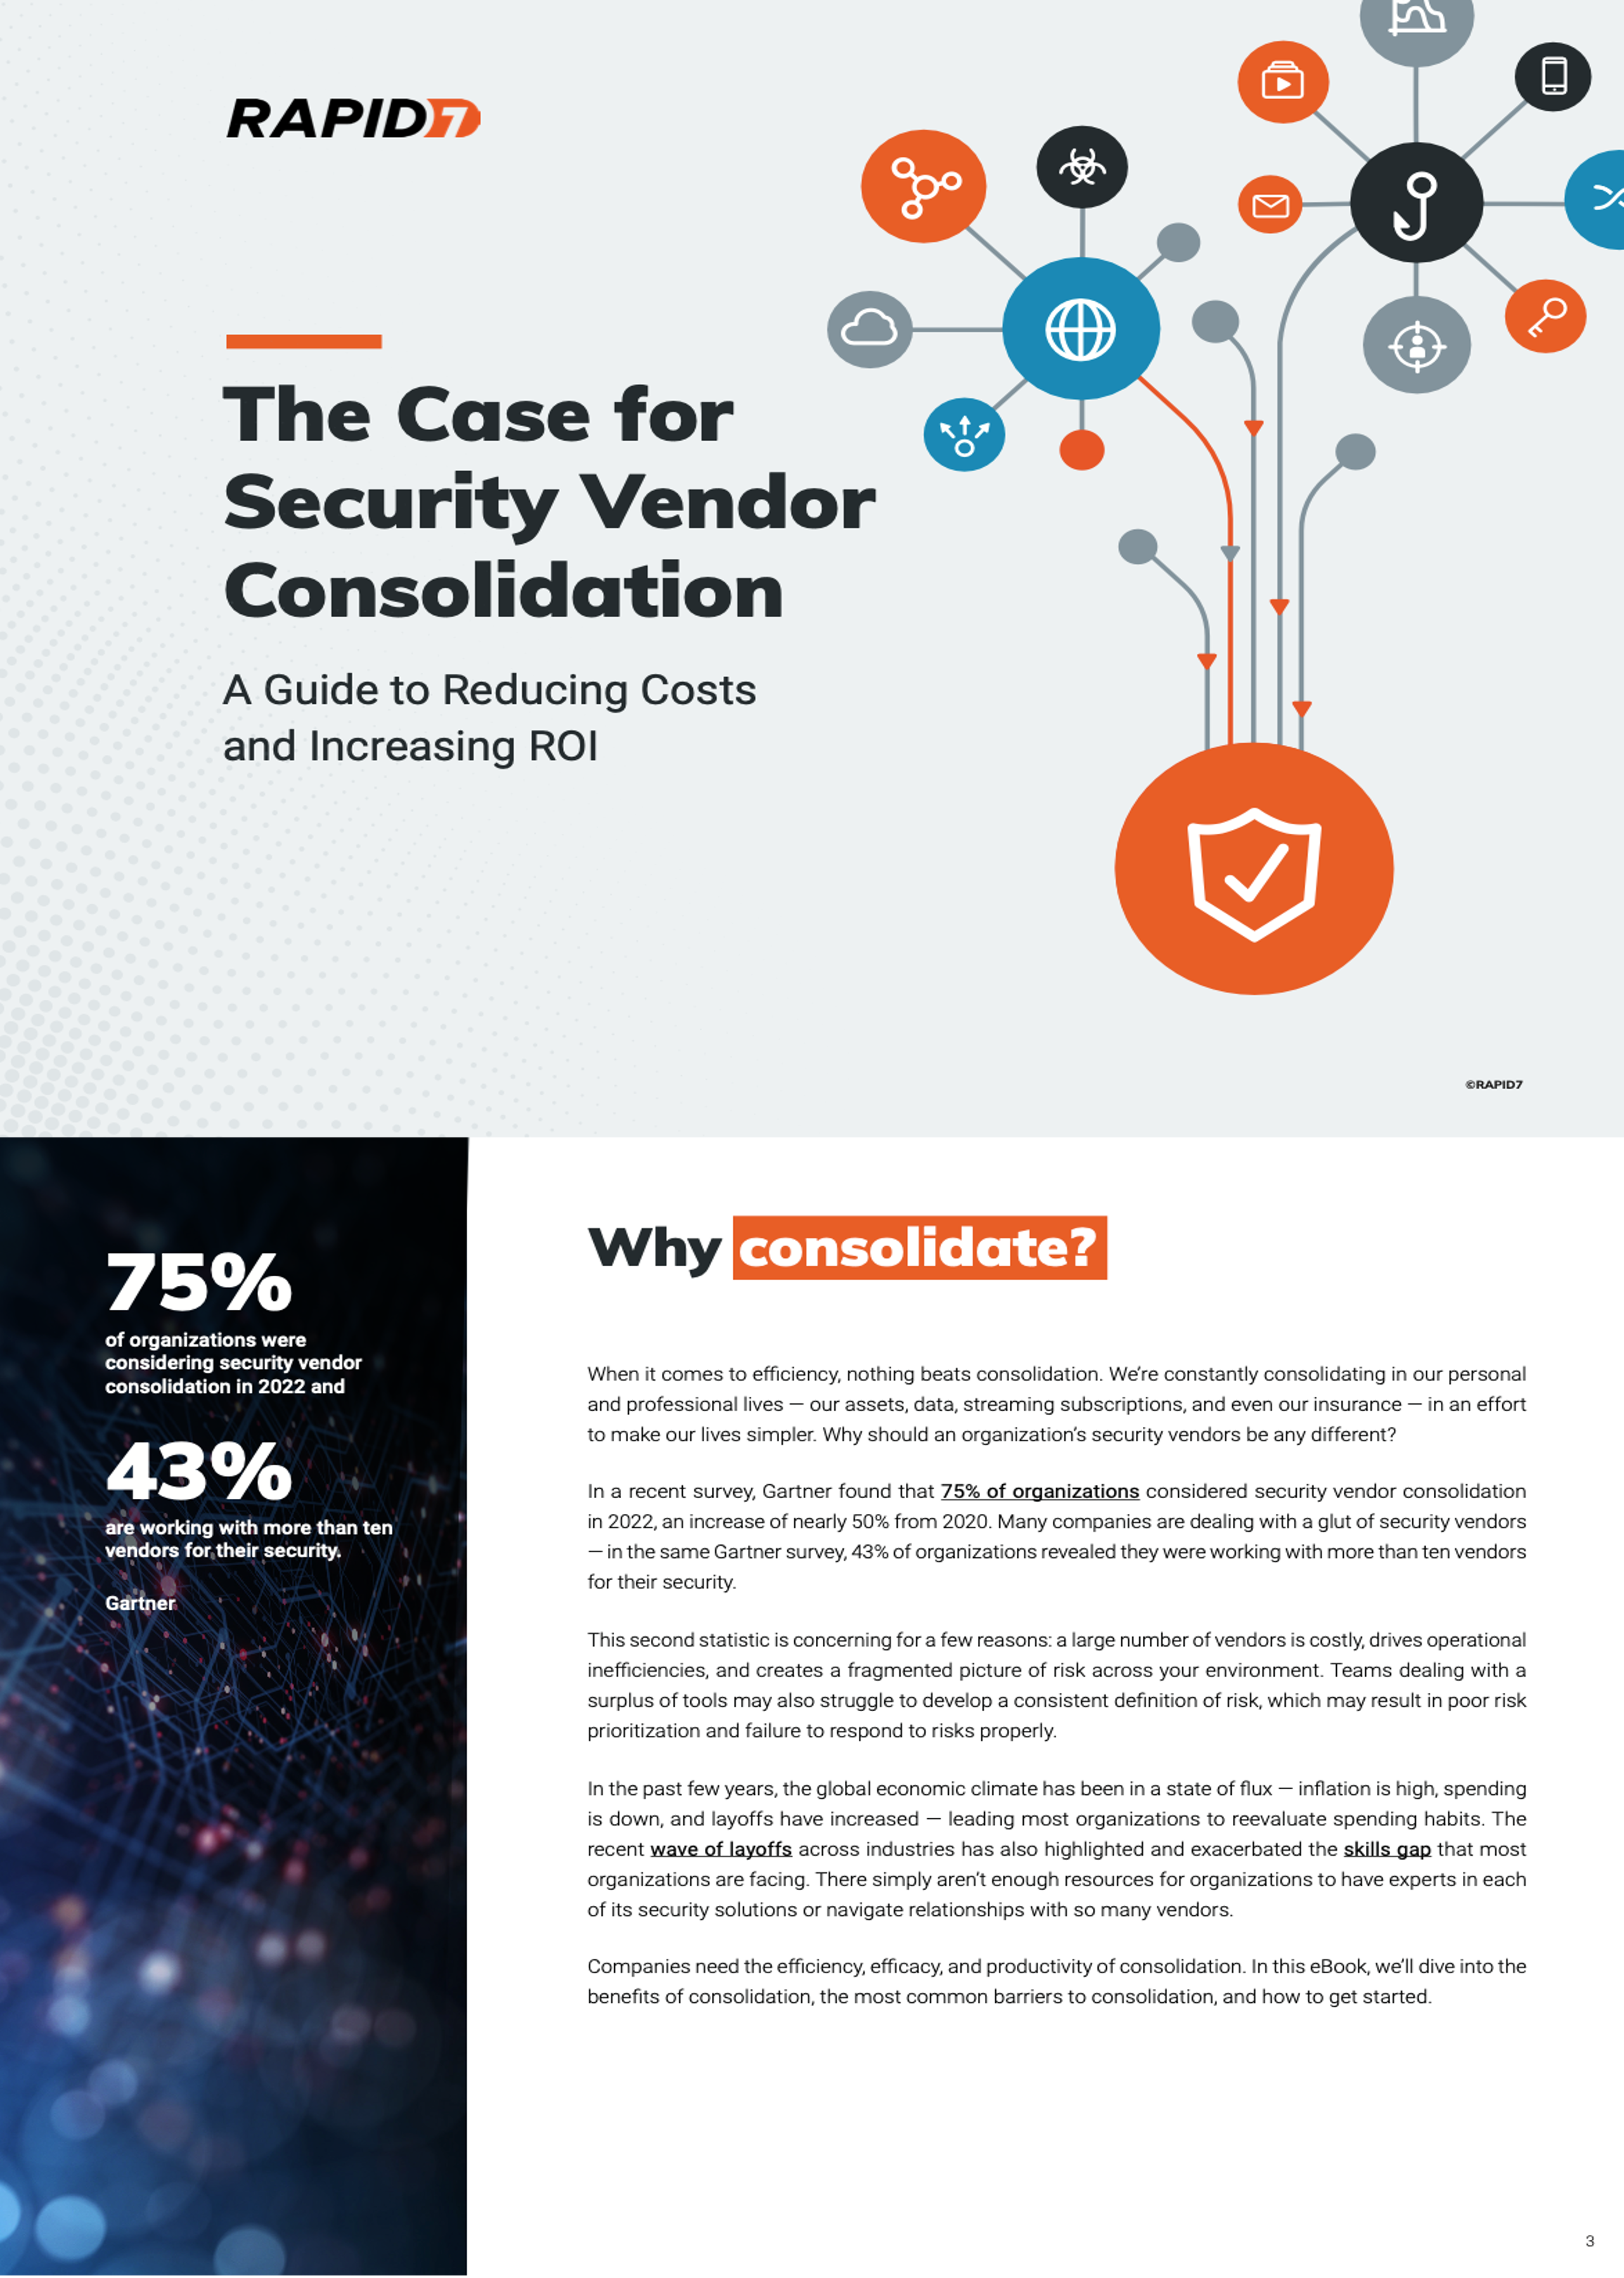 The Case for Security Vendor Consolidation: A guide to reducing costs and increasing ROI